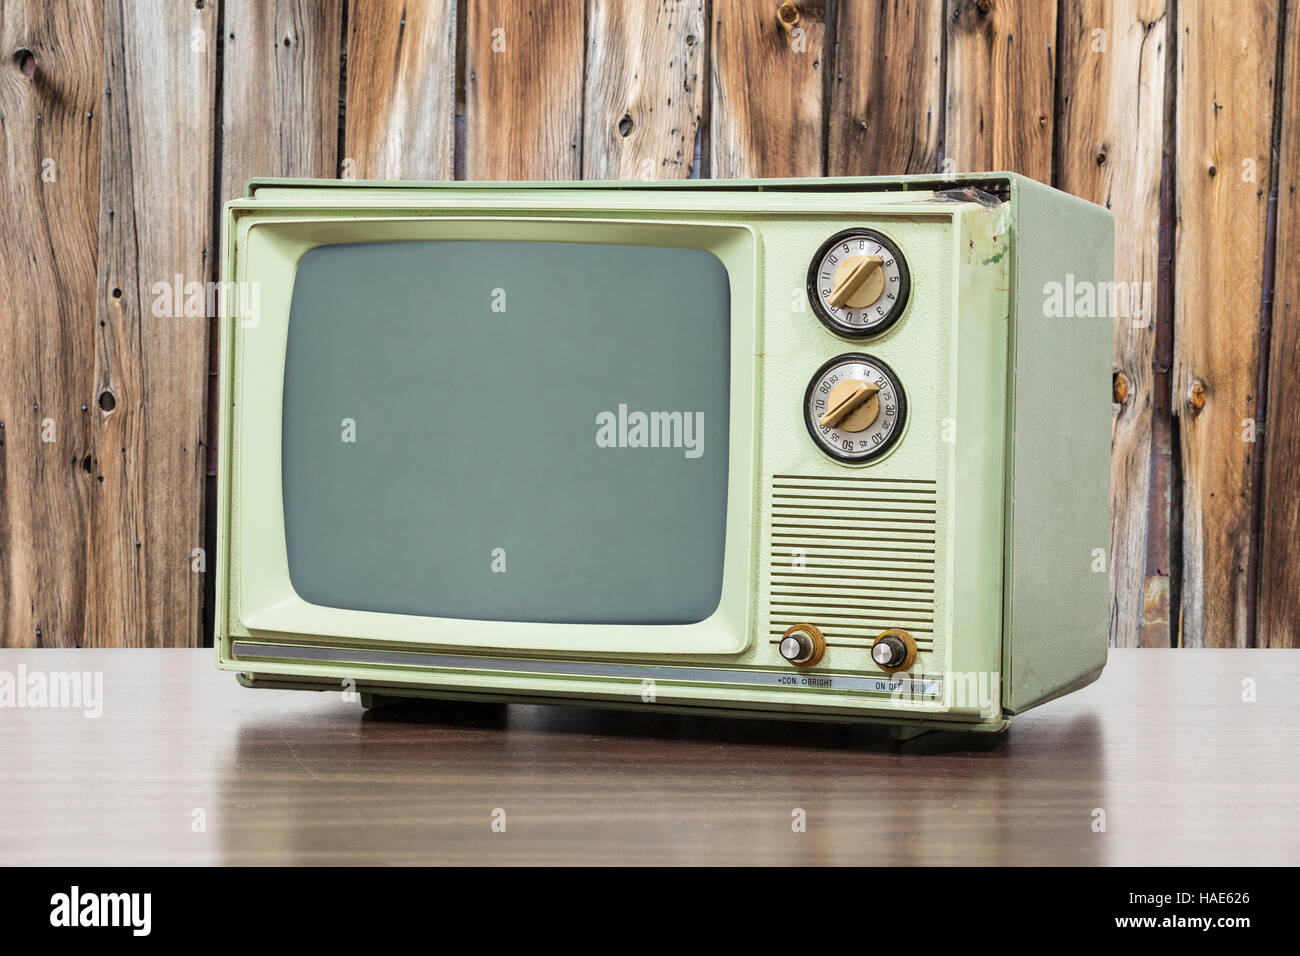 Green vintage television with old wood wall. Stock Photo